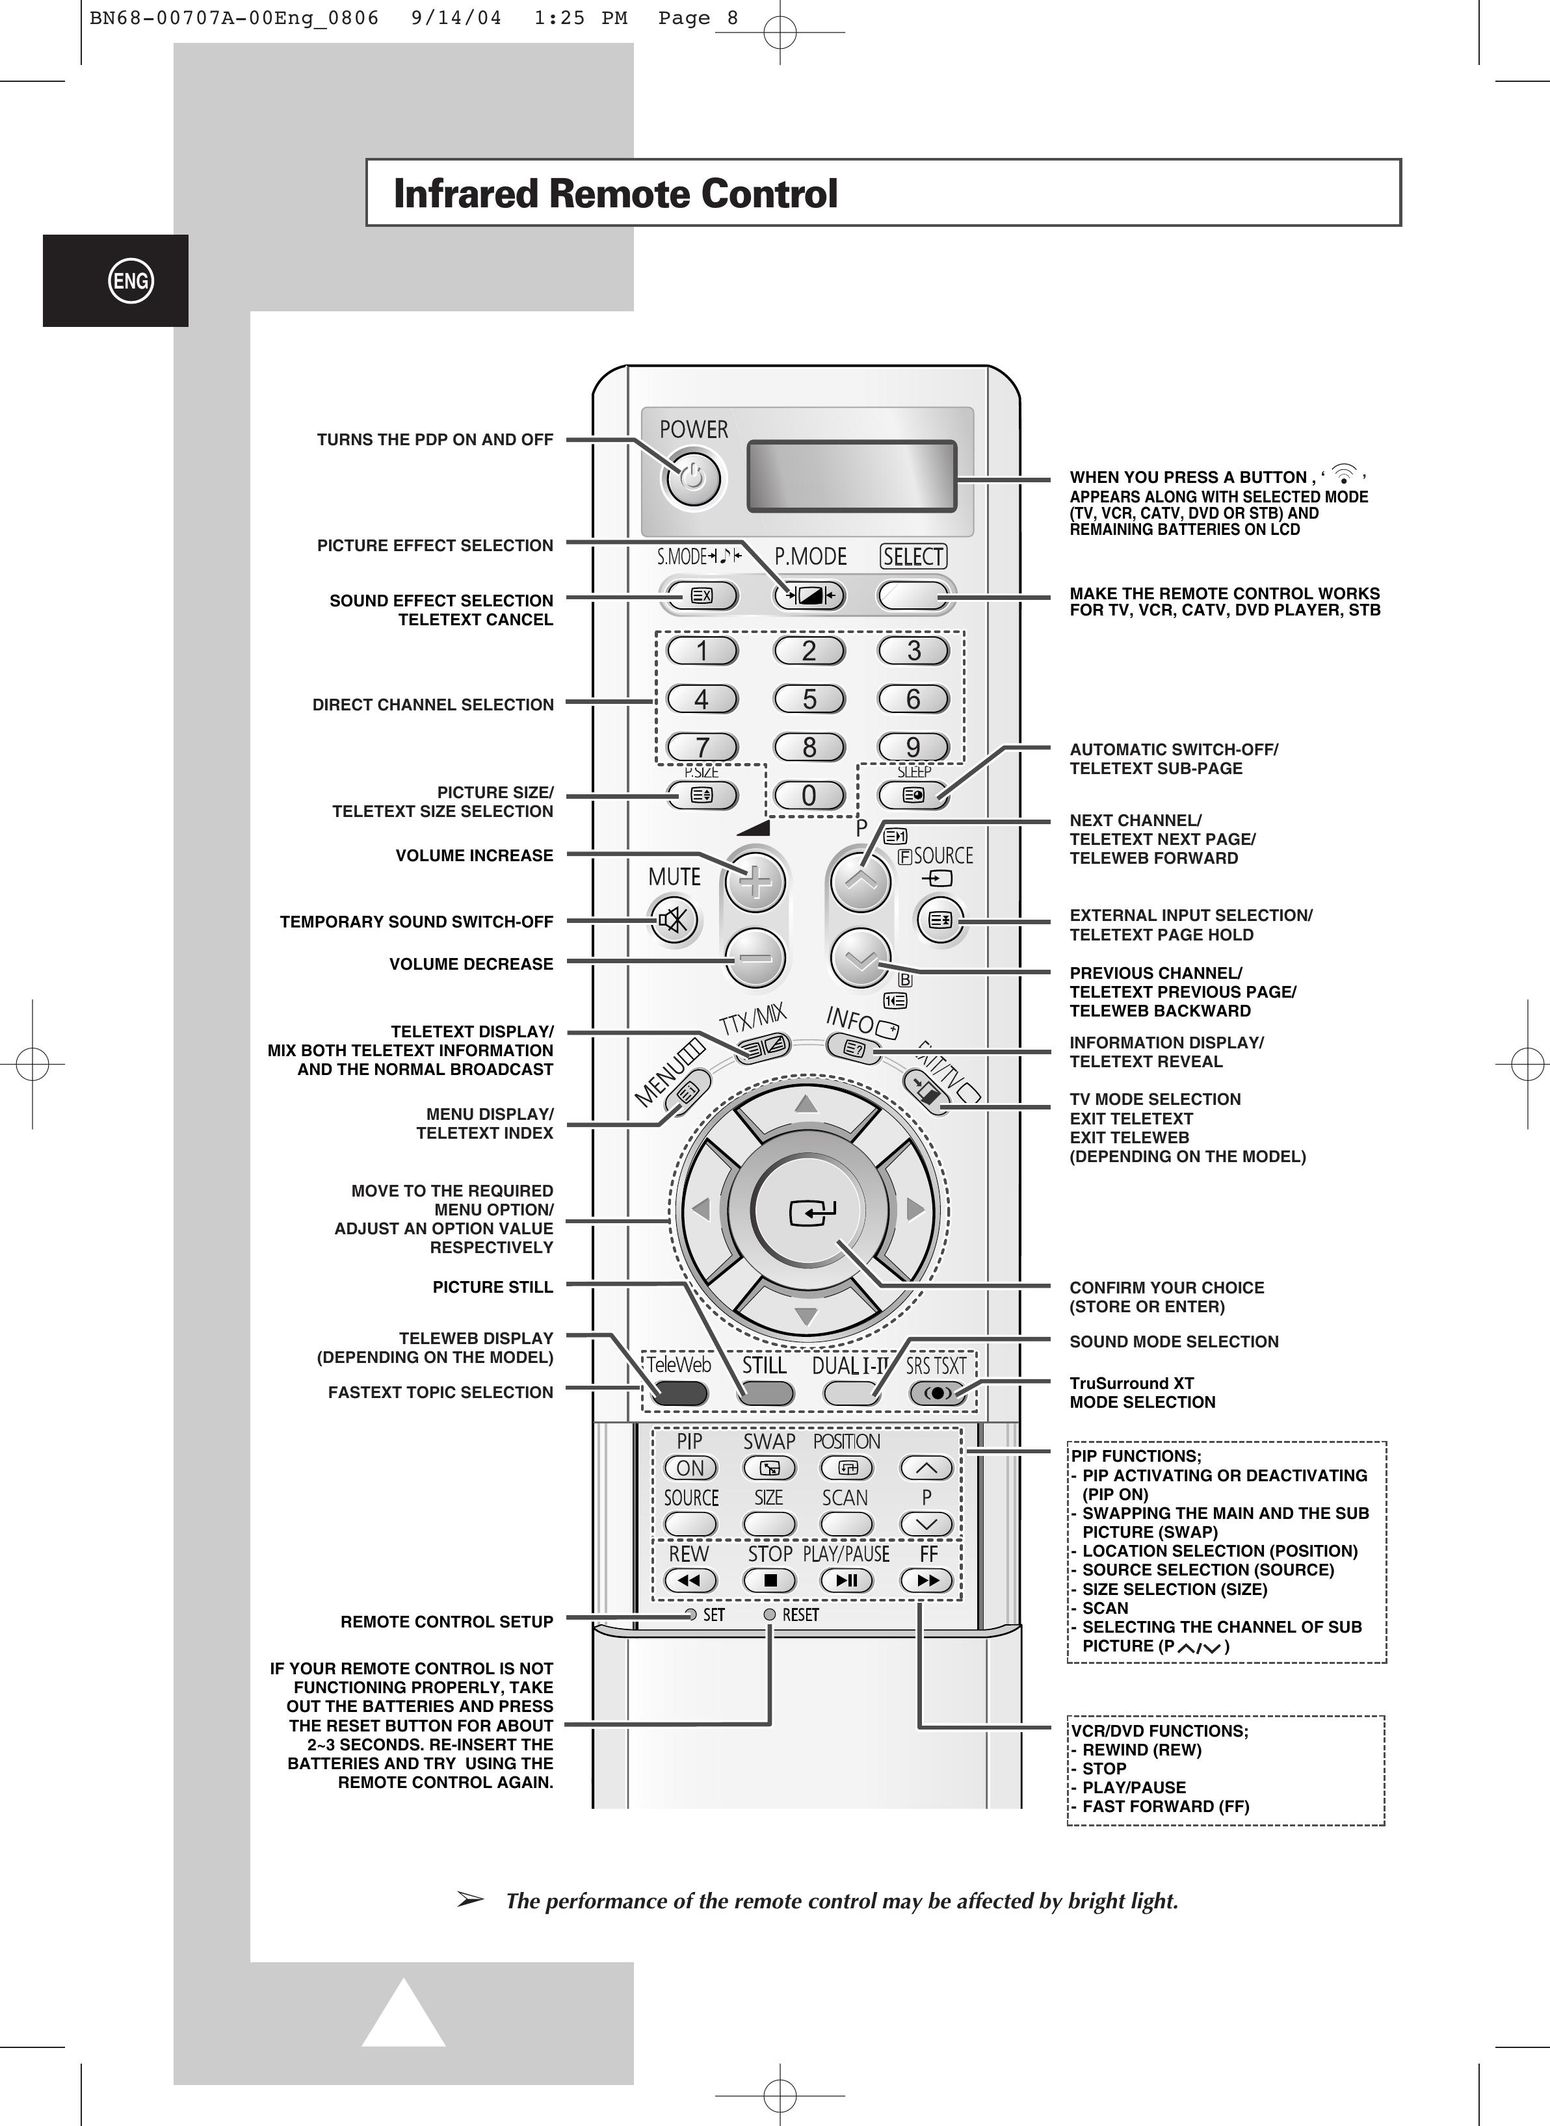 Samsung PS-37S4A1 Universal Remote User Manual